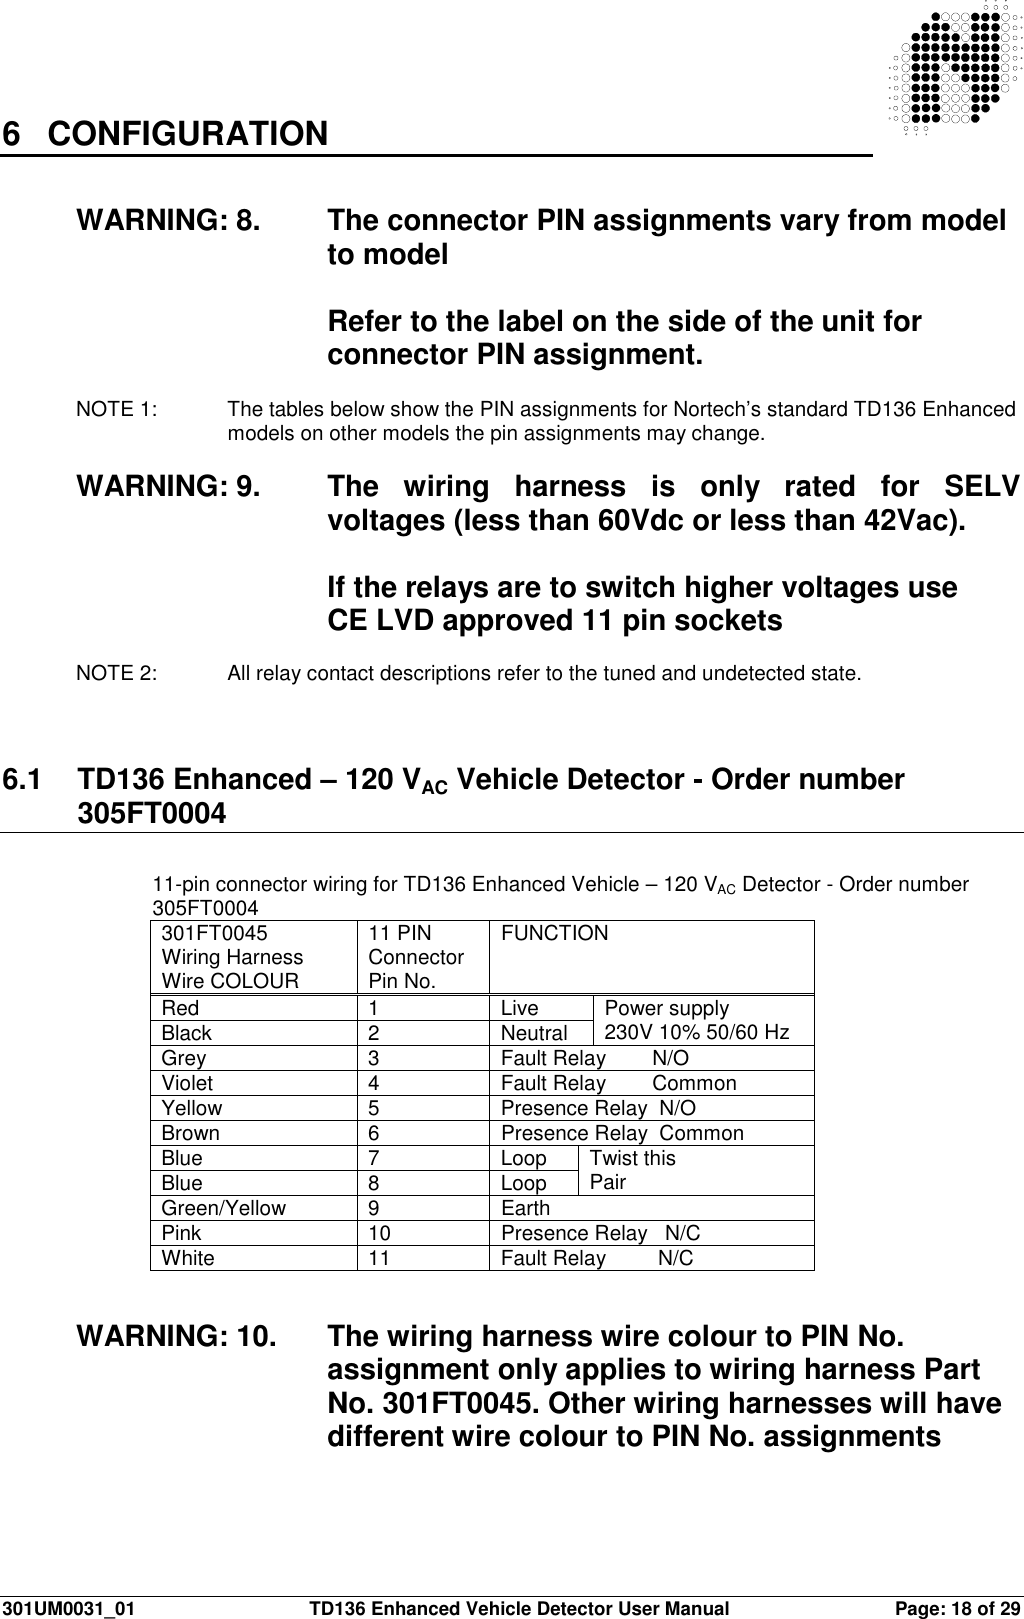  301UM0031_01  TD136 Enhanced Vehicle Detector User Manual  Page: 18 of 29   6  CONFIGURATION  WARNING: 8.  The connector PIN assignments vary from model to model  Refer to the label on the side of the unit for connector PIN assignment.   NOTE 1:  The tables below show the PIN assignments for Nortech’s standard TD136 Enhanced models on other models the pin assignments may change.  WARNING: 9.  The  wiring  harness  is  only  rated  for  SELV voltages (less than 60Vdc or less than 42Vac).   If the relays are to switch higher voltages use  CE LVD approved 11 pin sockets  NOTE 2:  All relay contact descriptions refer to the tuned and undetected state.   6.1  TD136 Enhanced – 120 VAC Vehicle Detector - Order number 305FT0004  11-pin connector wiring for TD136 Enhanced Vehicle – 120 VAC Detector - Order number   305FT0004 301FT0045 Wiring Harness Wire COLOUR 11 PIN Connector Pin No. FUNCTION Red  1  Live Black  2  Neutral  Power supply 230V 10% 50/60 Hz Grey  3  Fault Relay        N/O Violet  4  Fault Relay        Common Yellow  5  Presence Relay  N/O Brown  6  Presence Relay  Common Blue  7  Loop Blue  8  Loop  Twist this Pair Green/Yellow  9  Earth Pink  10  Presence Relay   N/C White  11  Fault Relay         N/C   WARNING: 10.  The wiring harness wire colour to PIN No. assignment only applies to wiring harness Part No. 301FT0045. Other wiring harnesses will have different wire colour to PIN No. assignments    